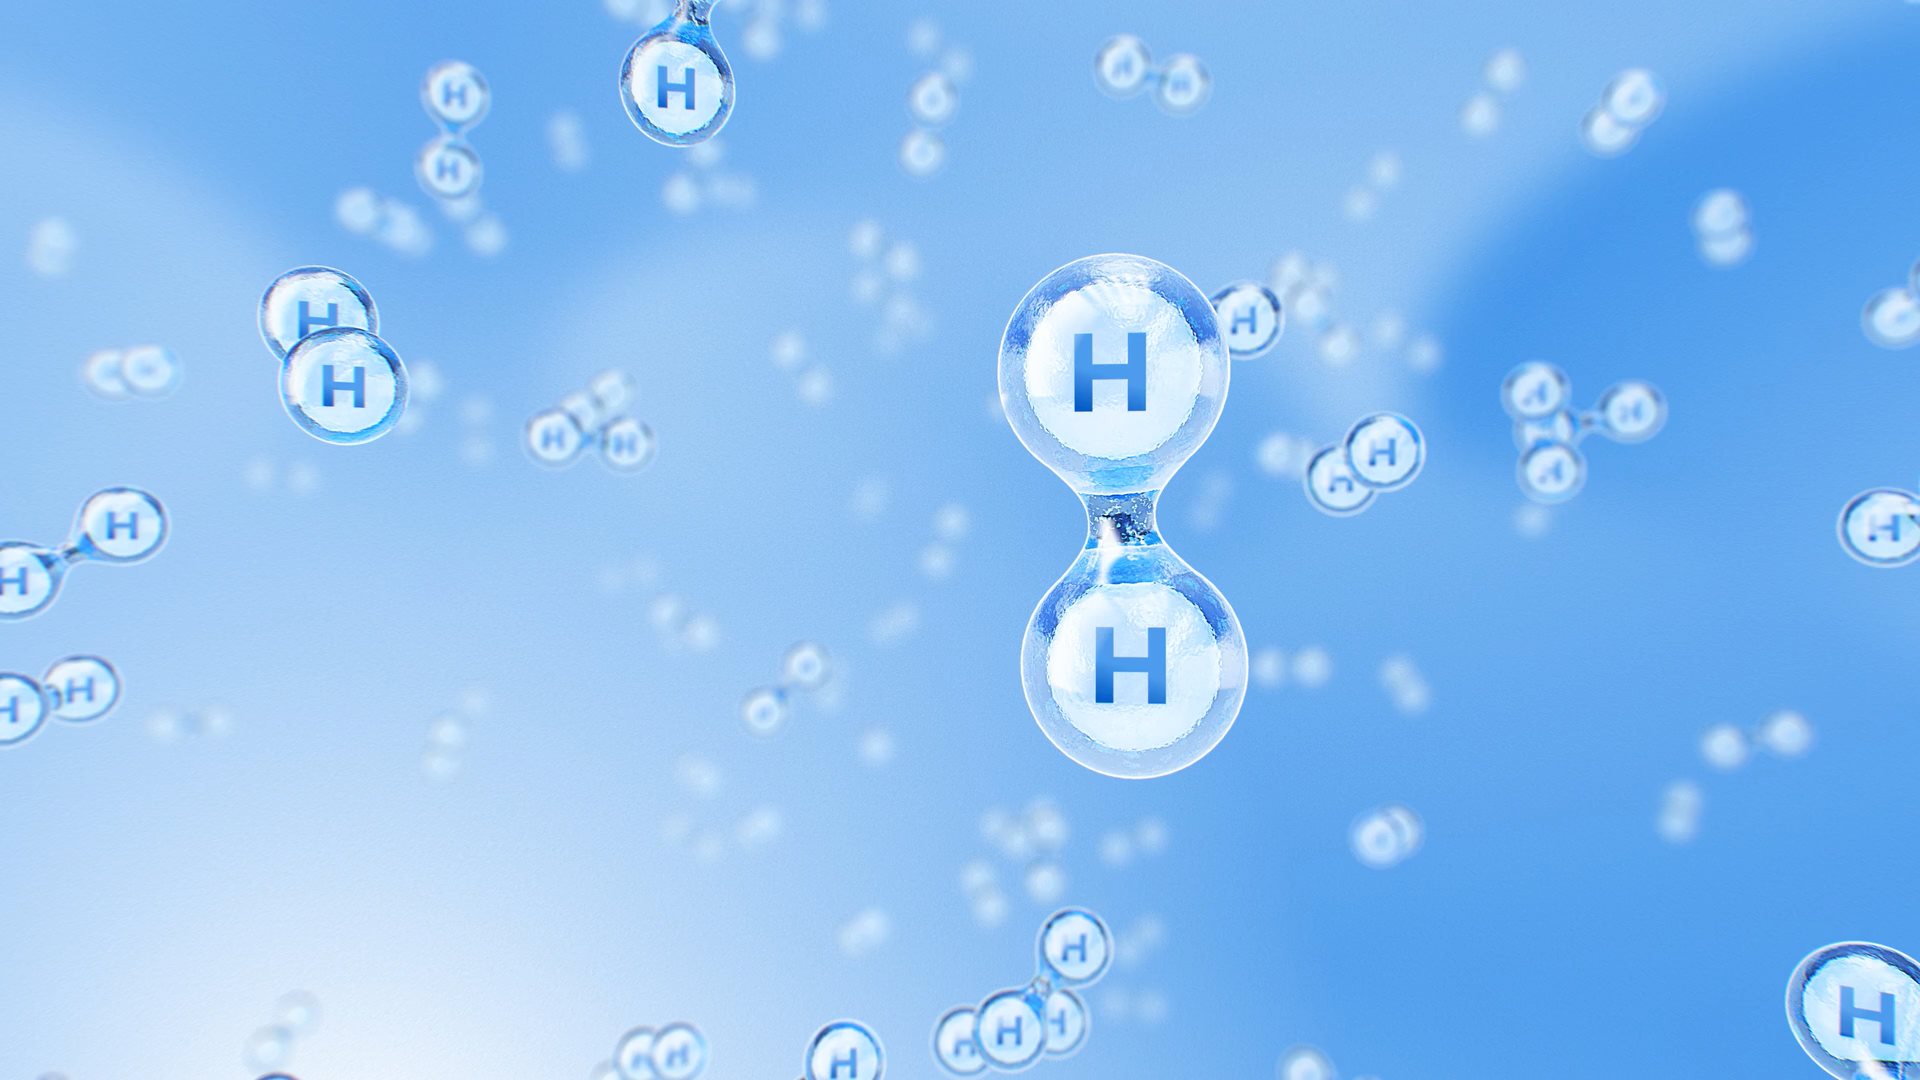 Video of Hydrogen H2 elements